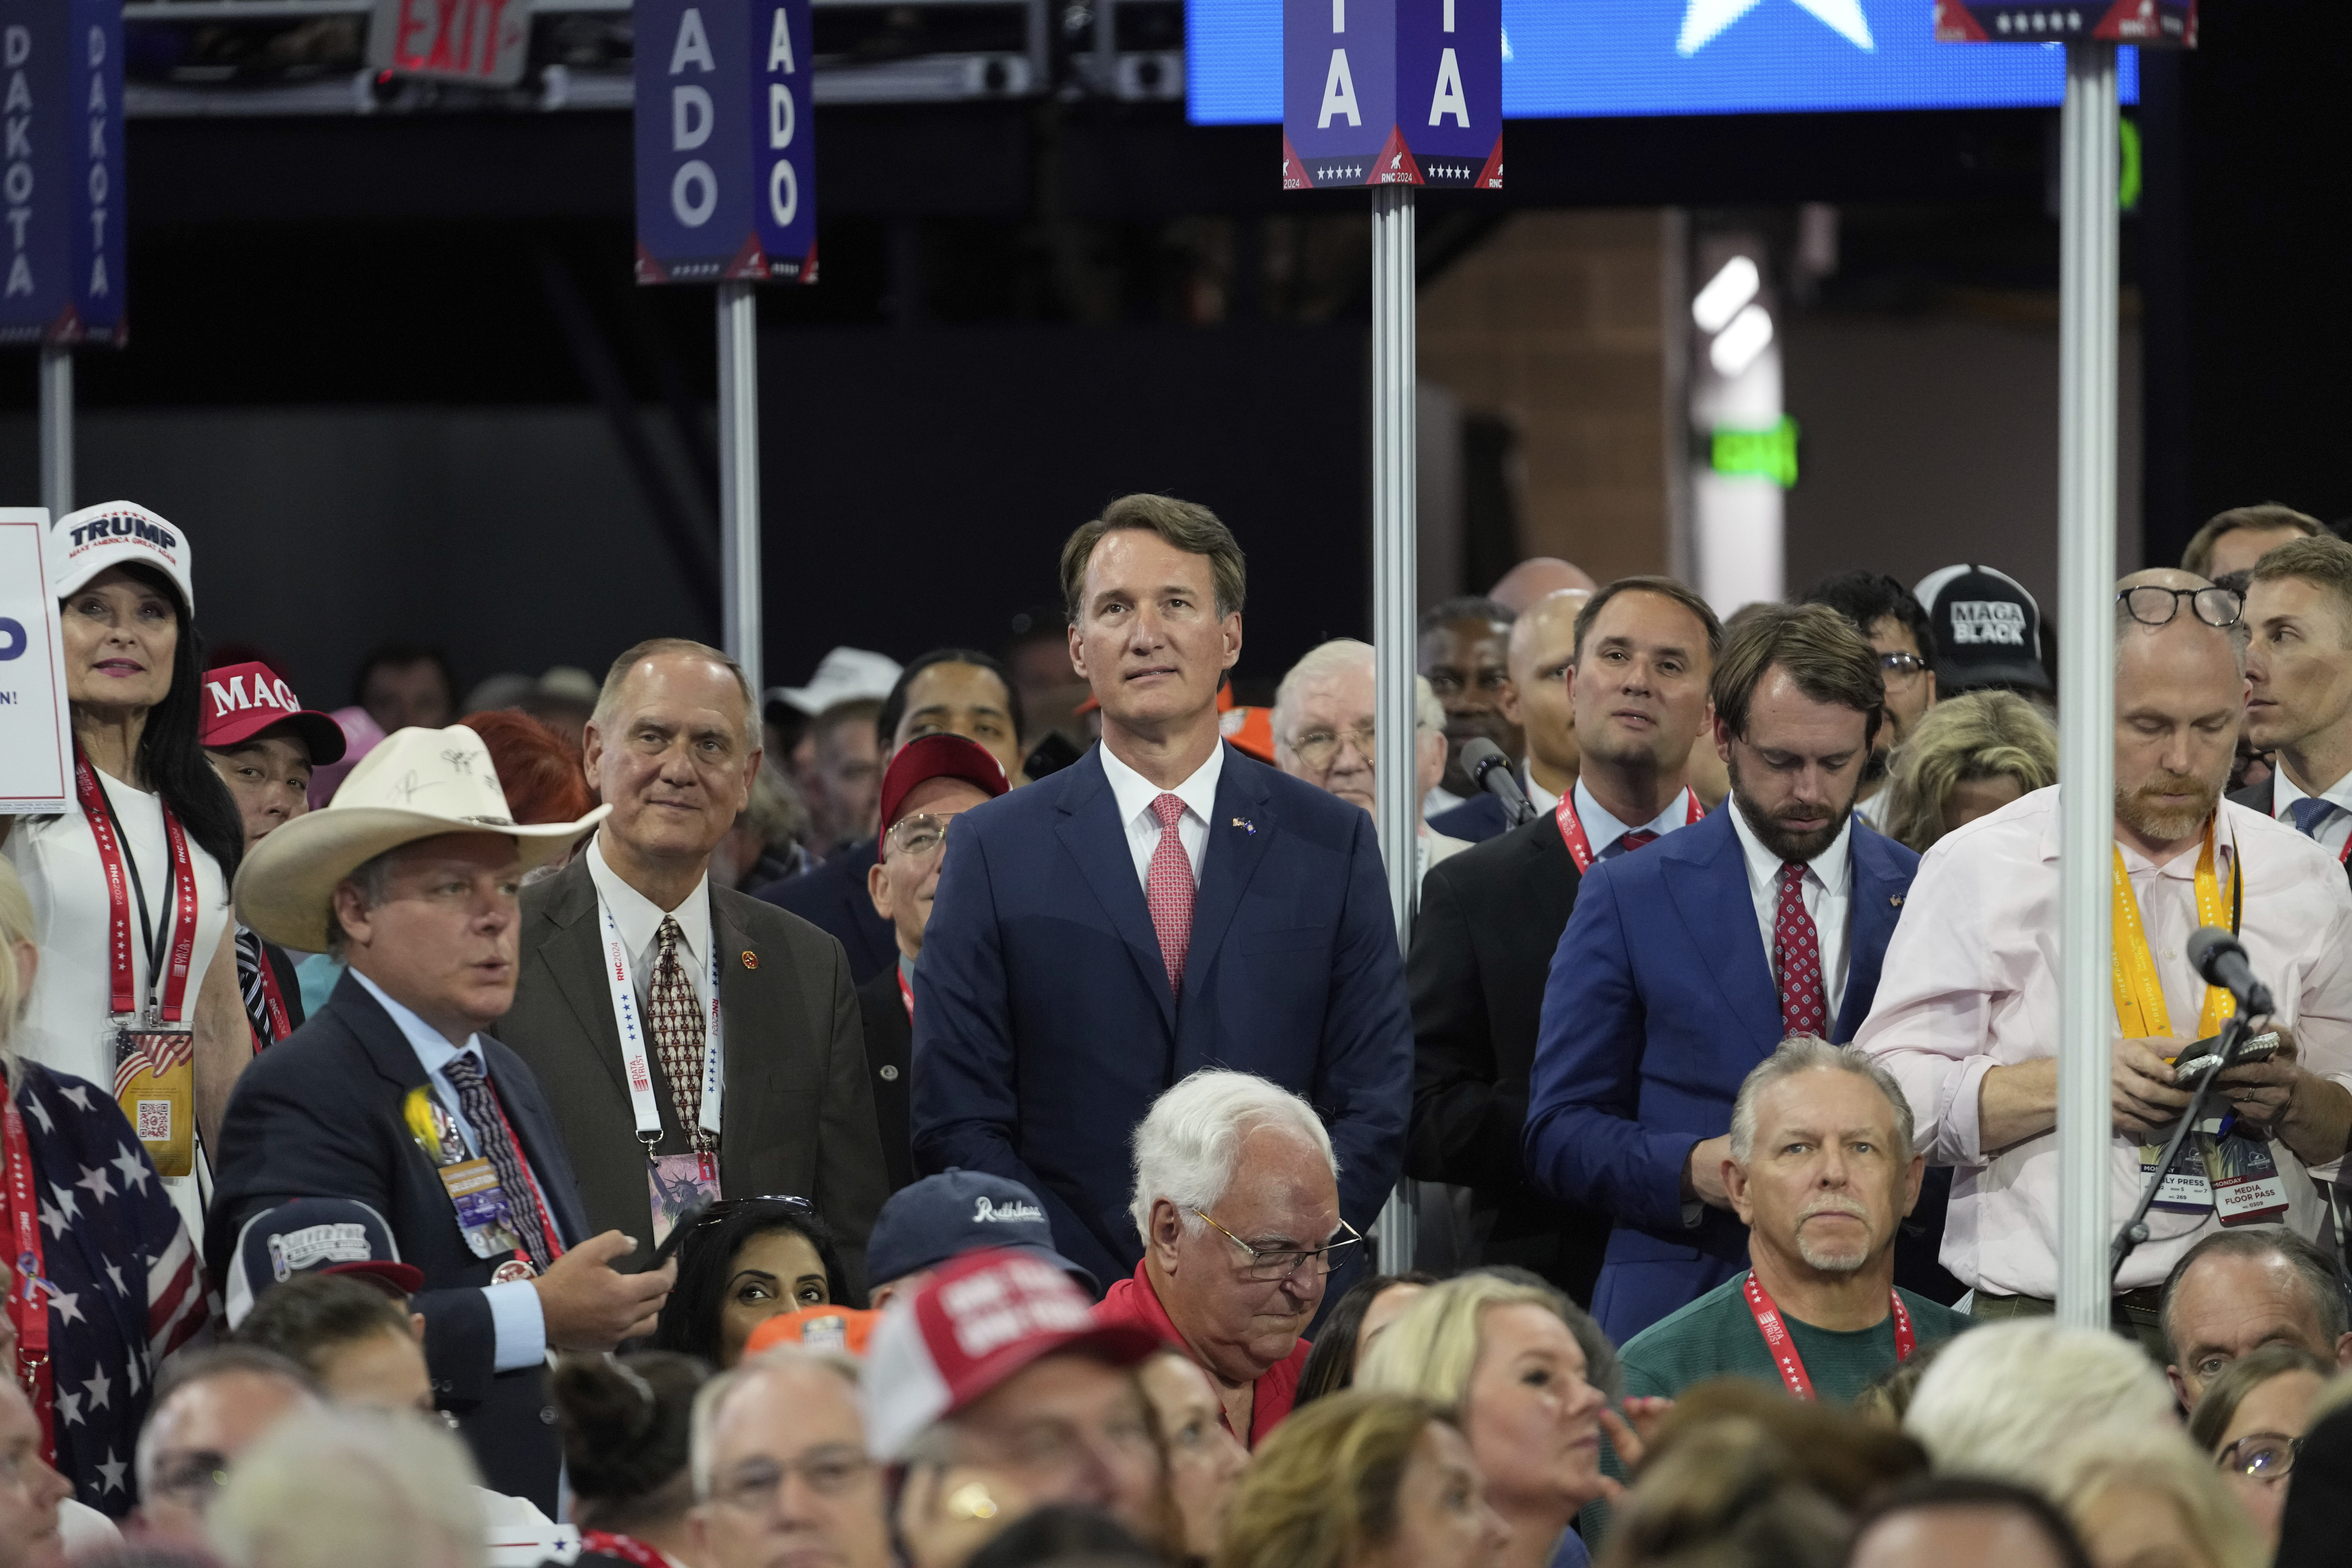 WATCH LIVE: On day 1 of RNC, Trump chosen as nominee; JD Vance as VP pick